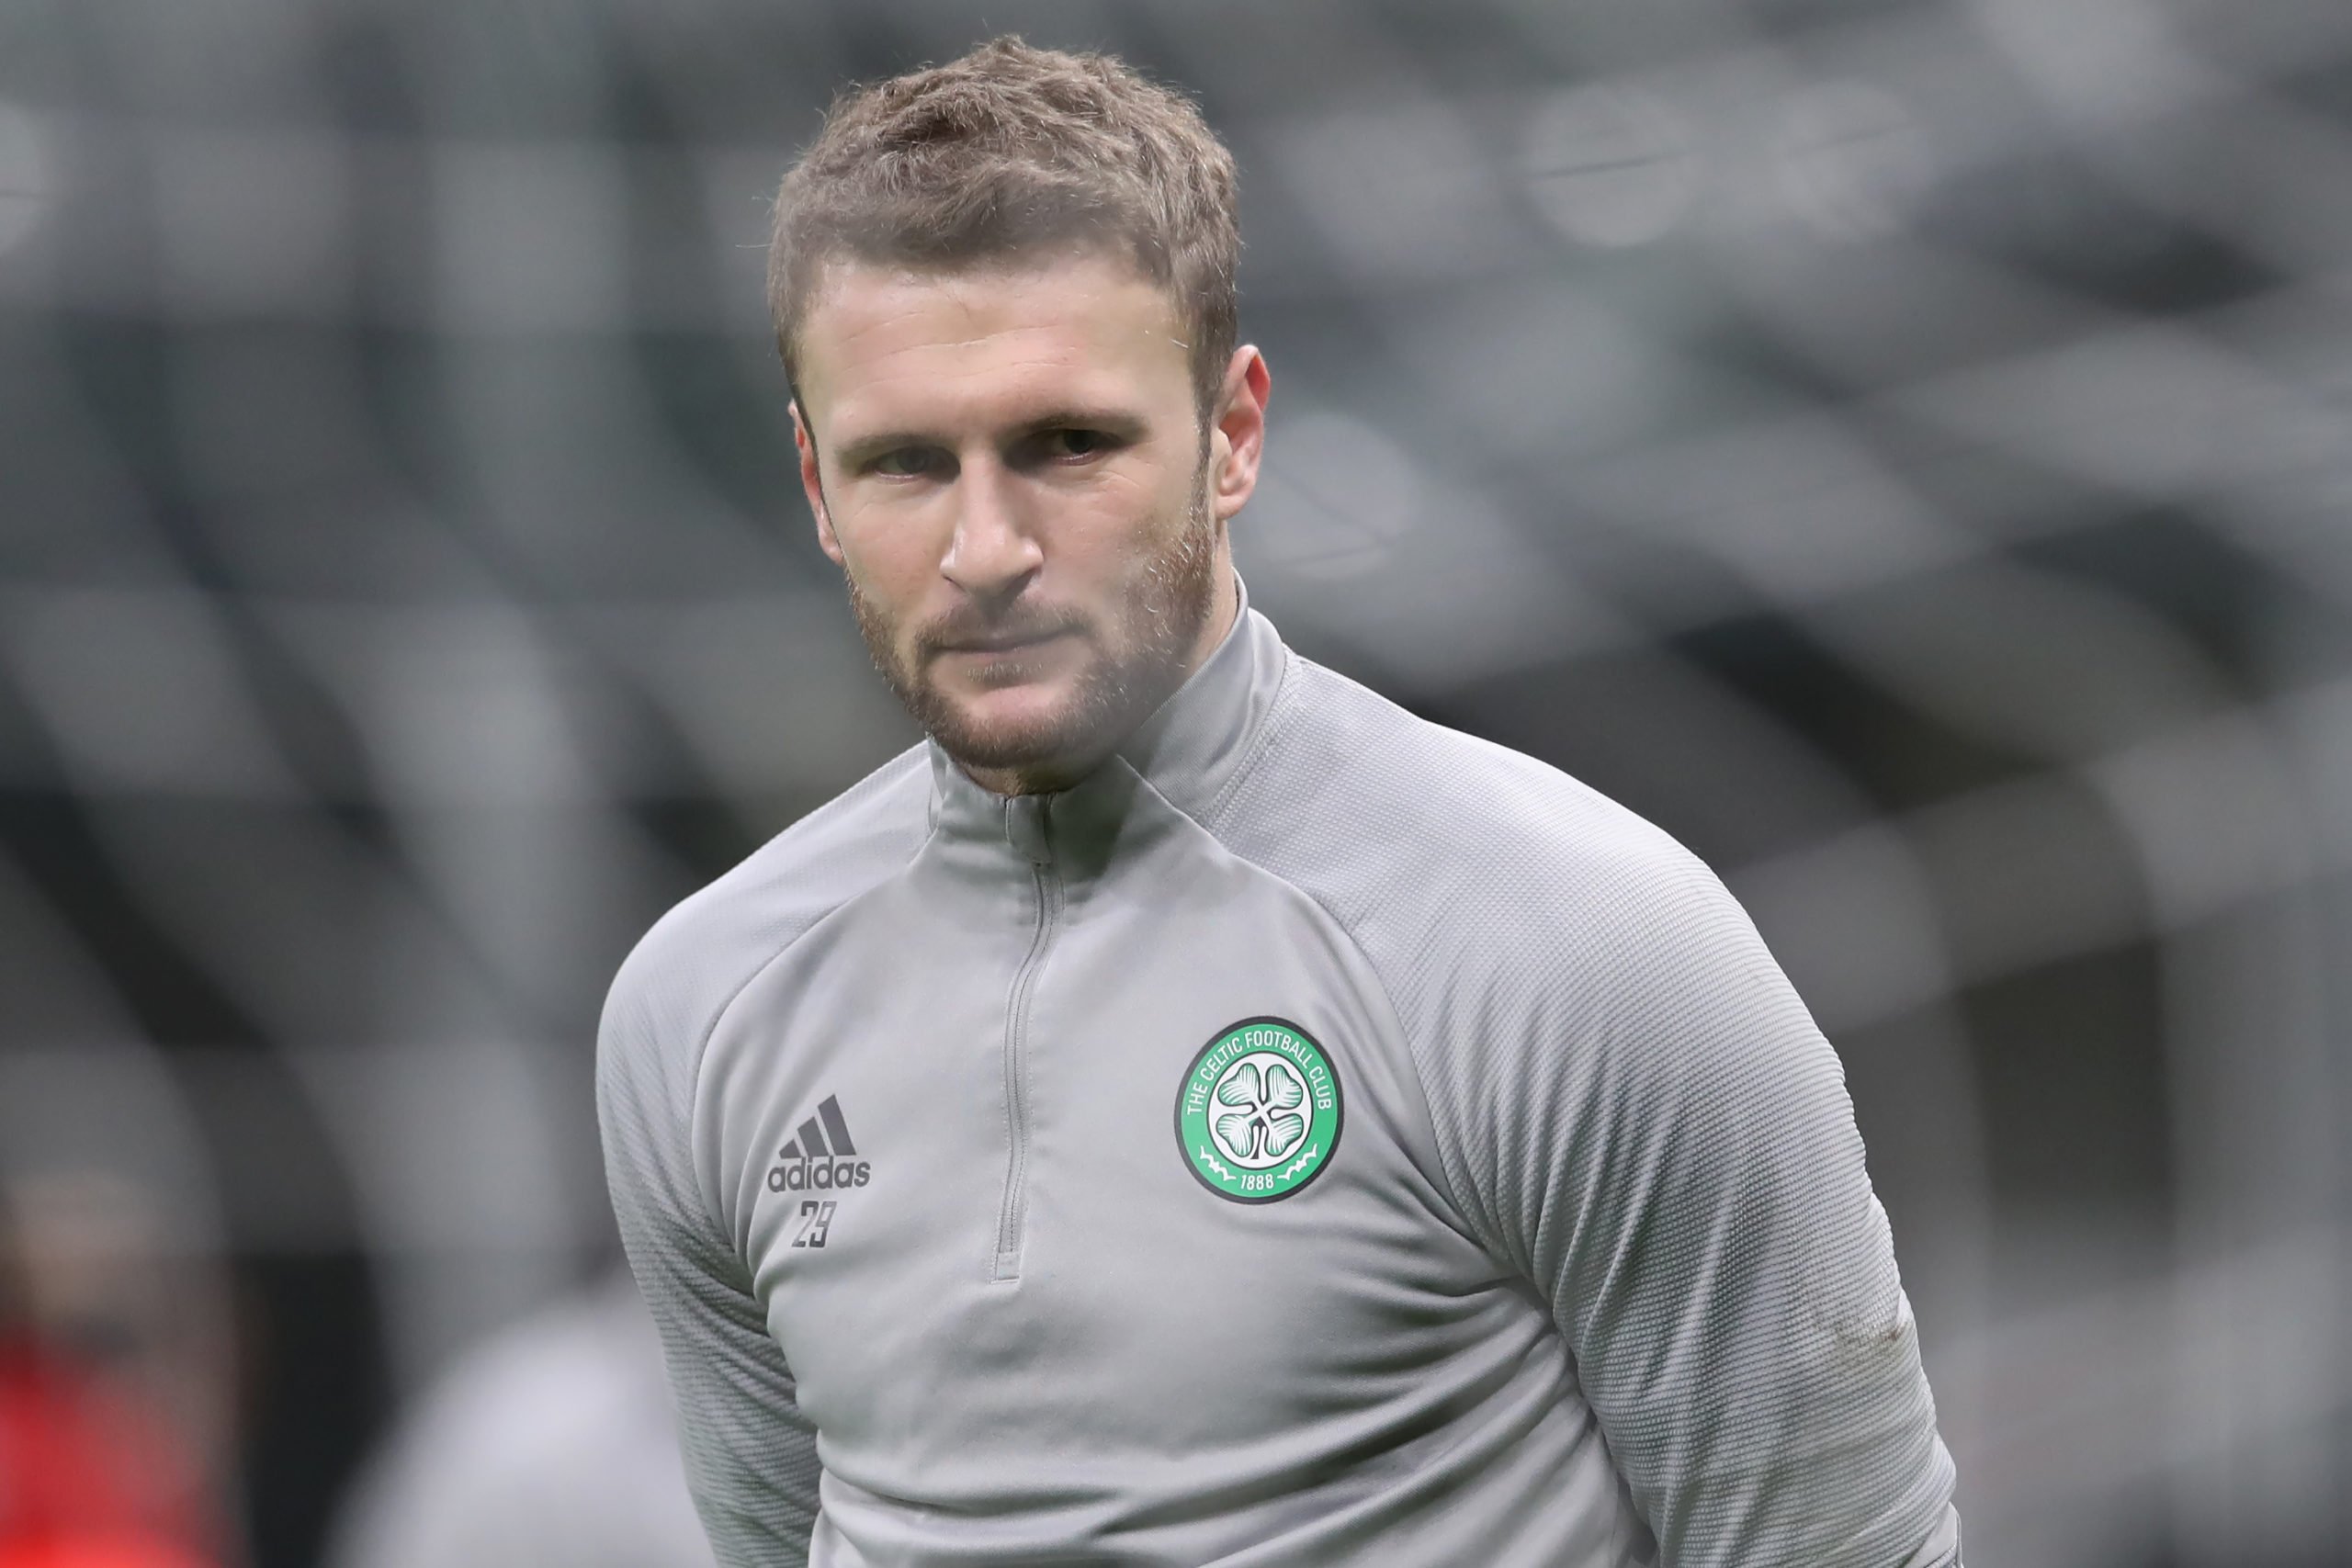 The goalkeeping situation is hotting up at Celtic ahead of Midtjylland